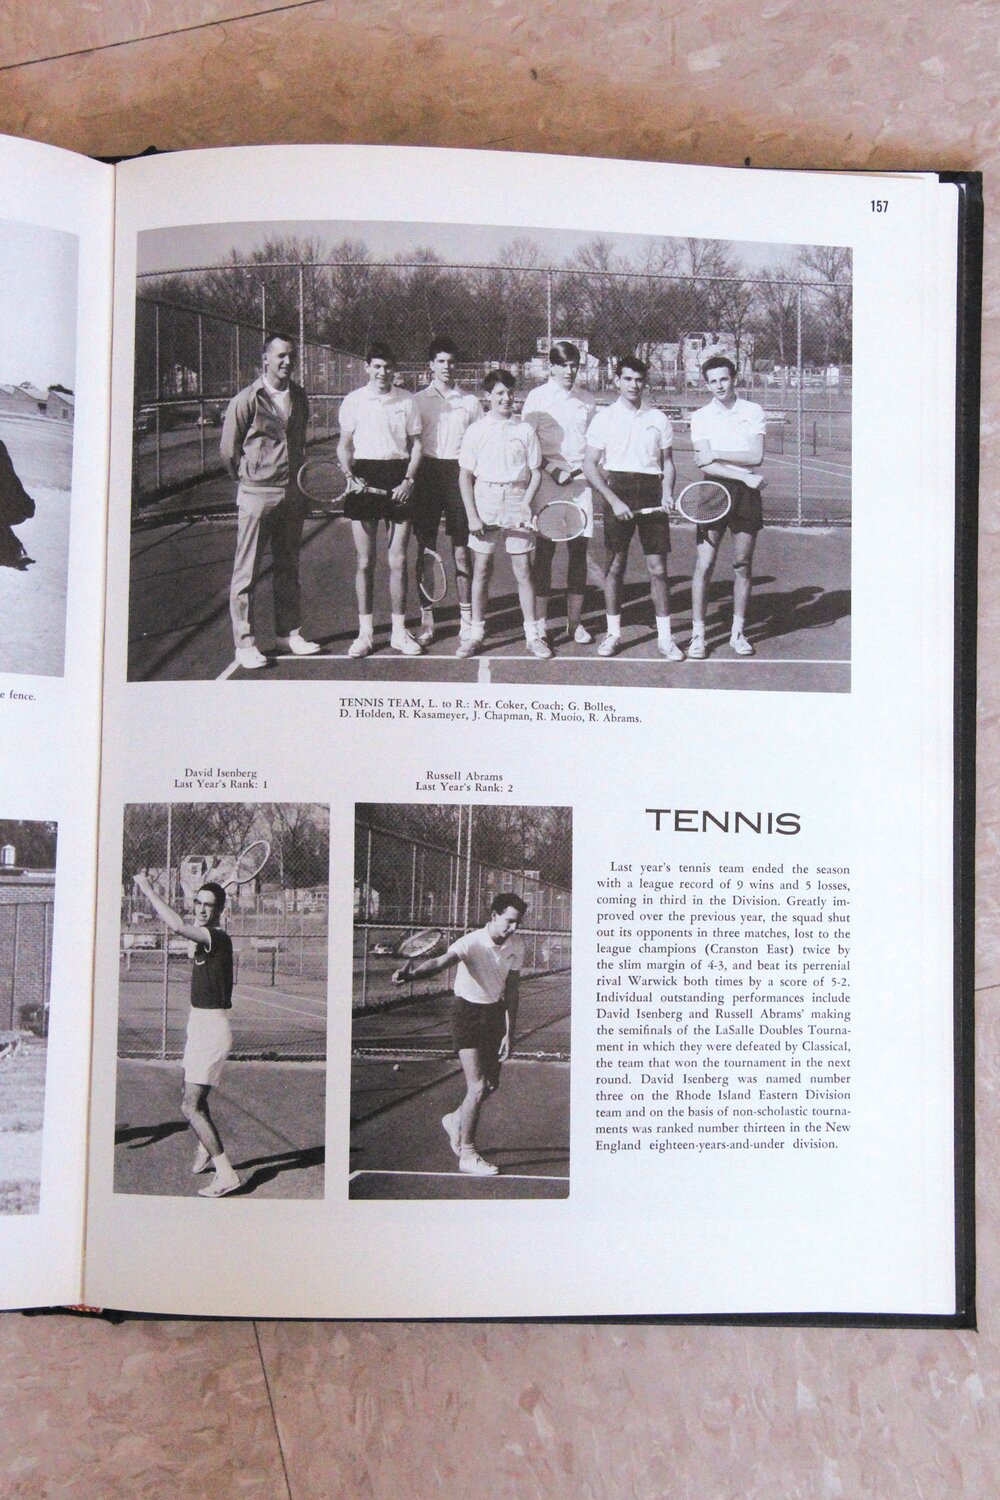 PATRIOT PLAYERS: Coach Coker as pictured in the 1965 Pilgrim High yearbook with the tennis team.